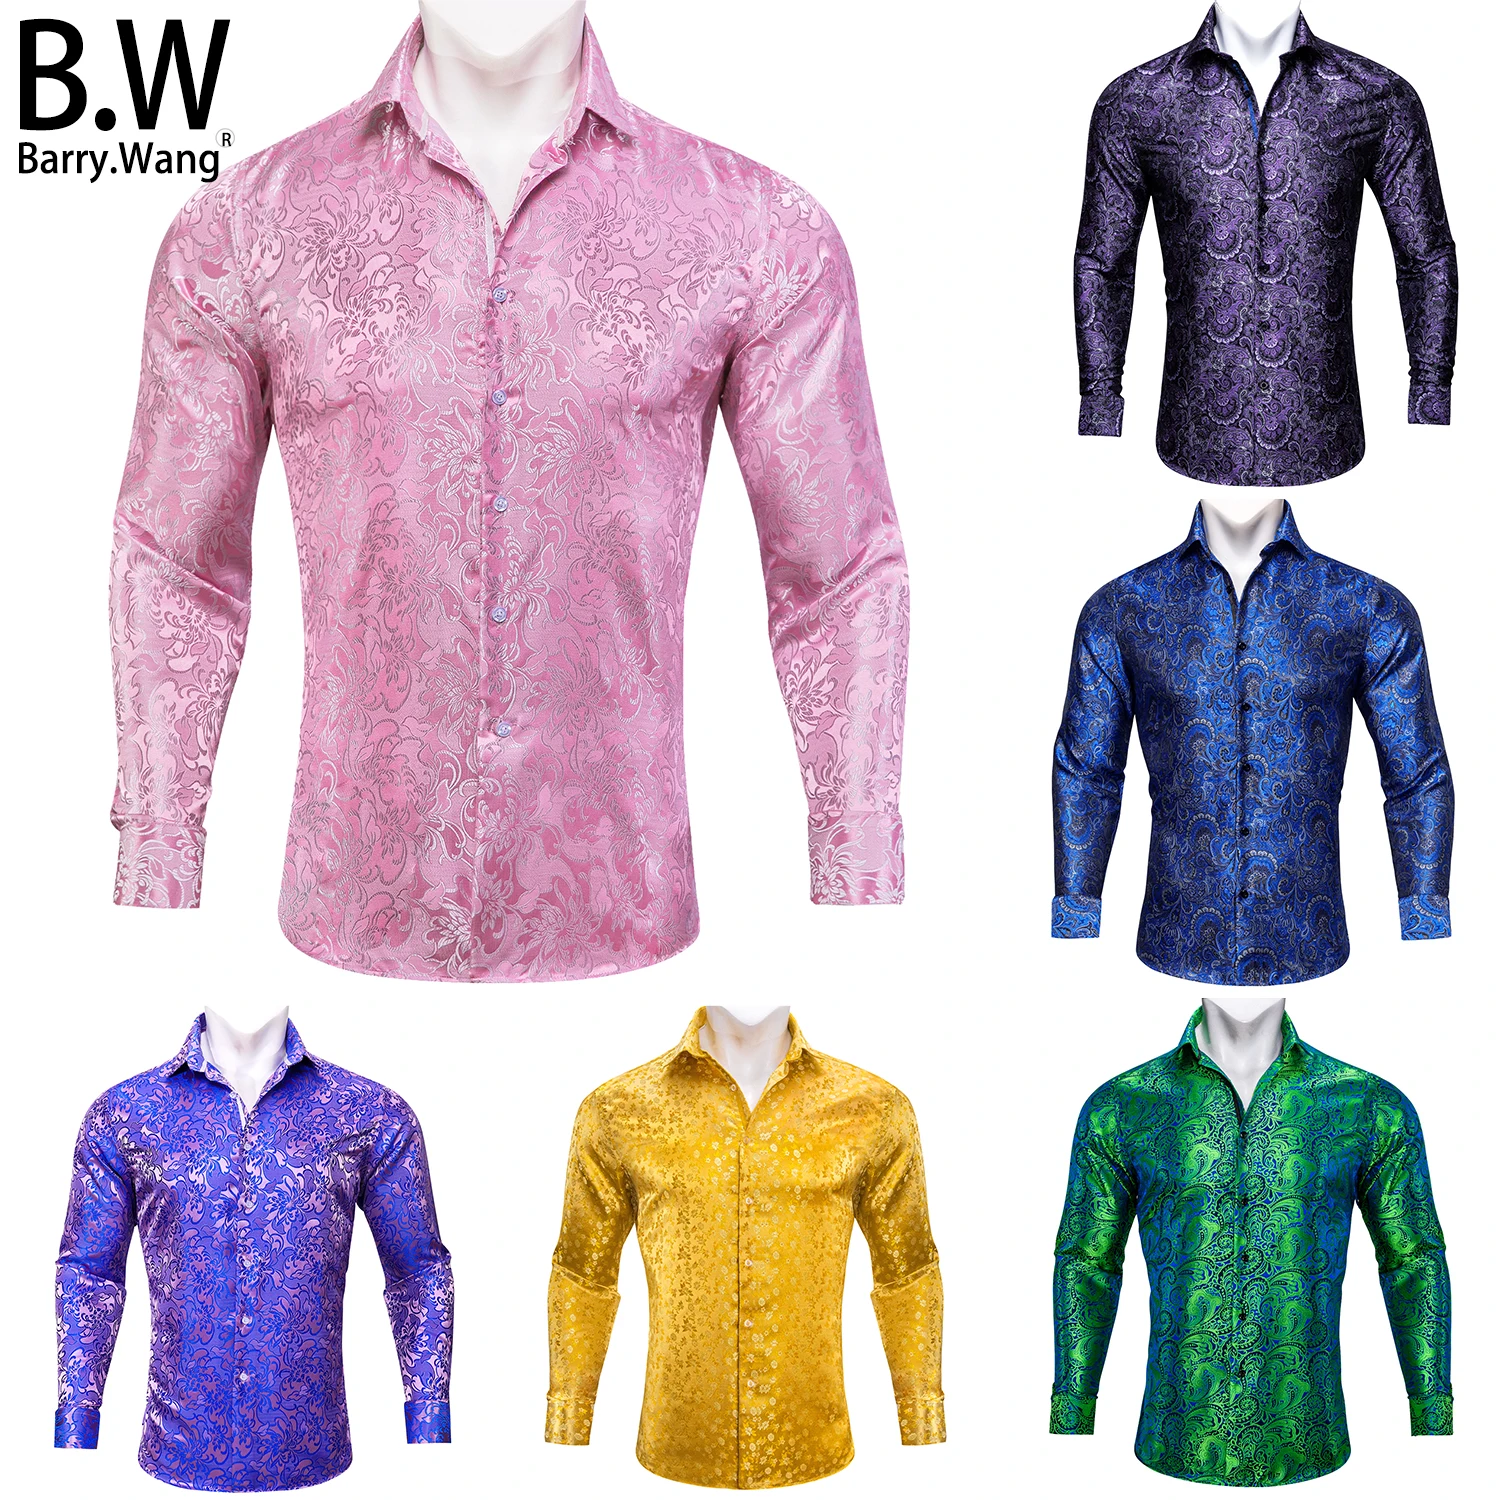 

Barry.Wang Luxury Silk Mens Shirts Jacquard Floral Long Sleeve Formal Casual 26 Colours Male Blouses Wedding Business Prom Gift